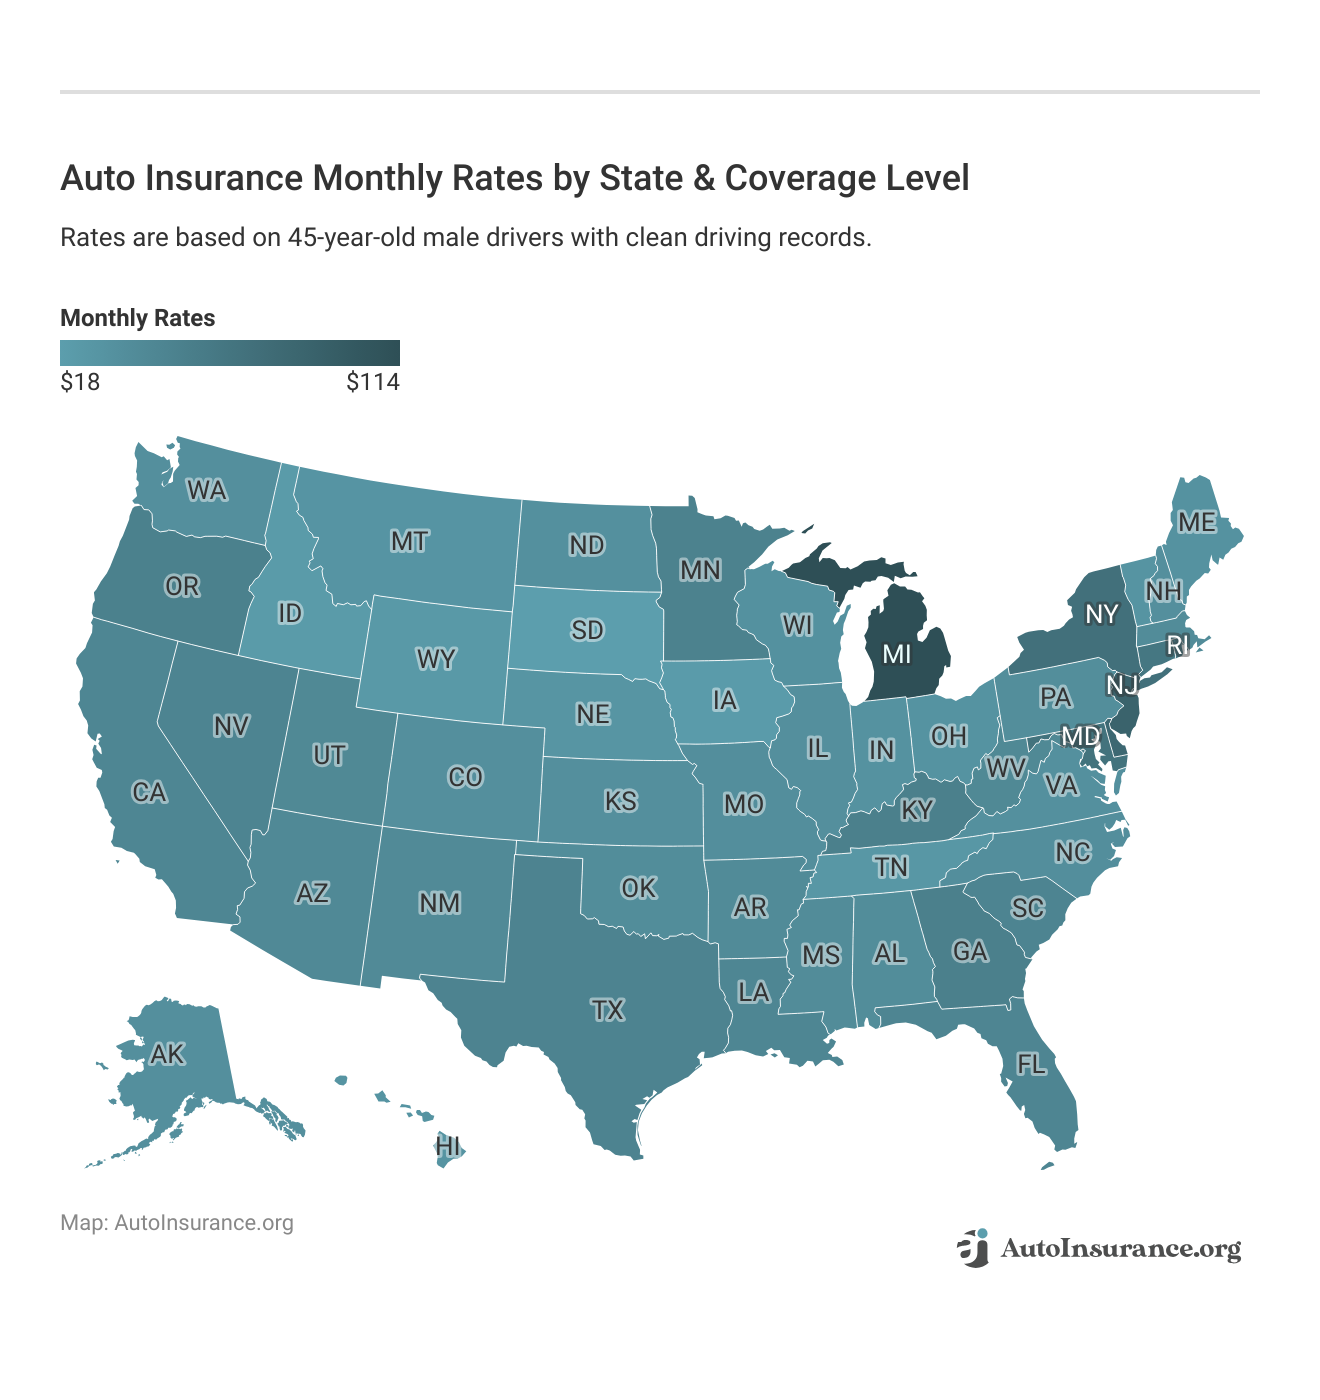 <h3>Auto Insurance Monthly Rates by State & Coverage Level</h3>